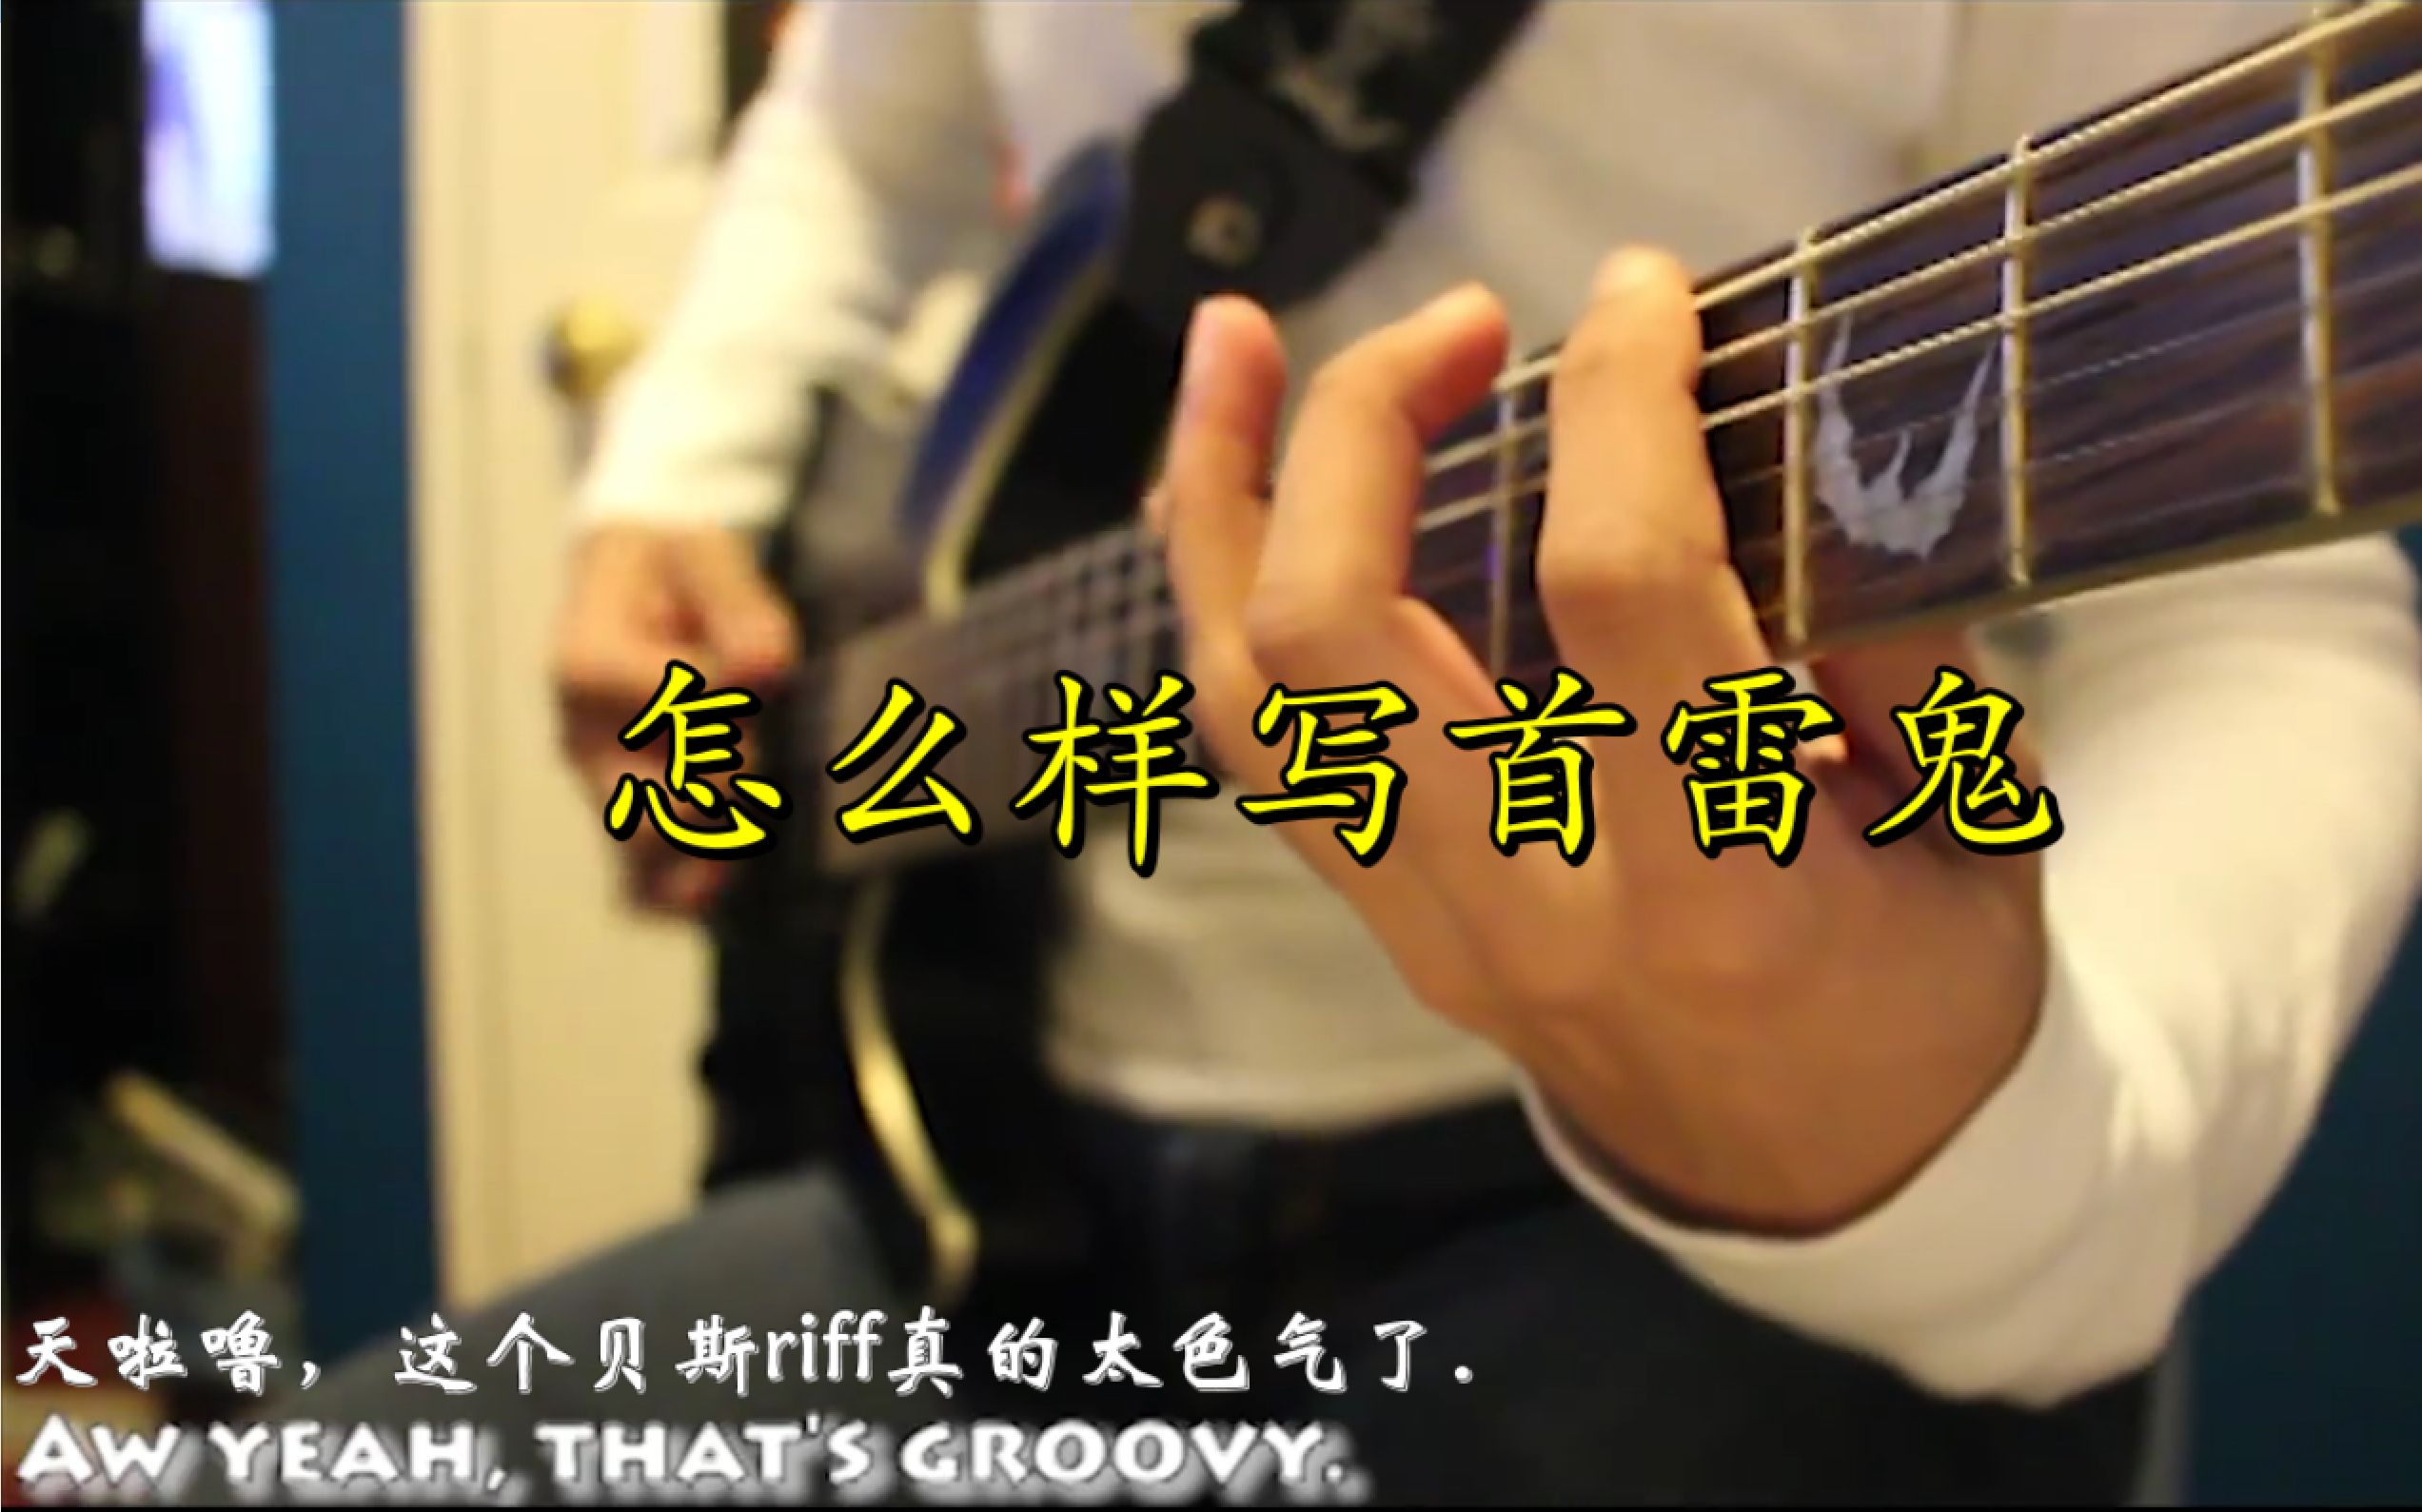 【How To:】如何在5分钟内成为Jason Mraz | Make a Reggae Rock Song in 5